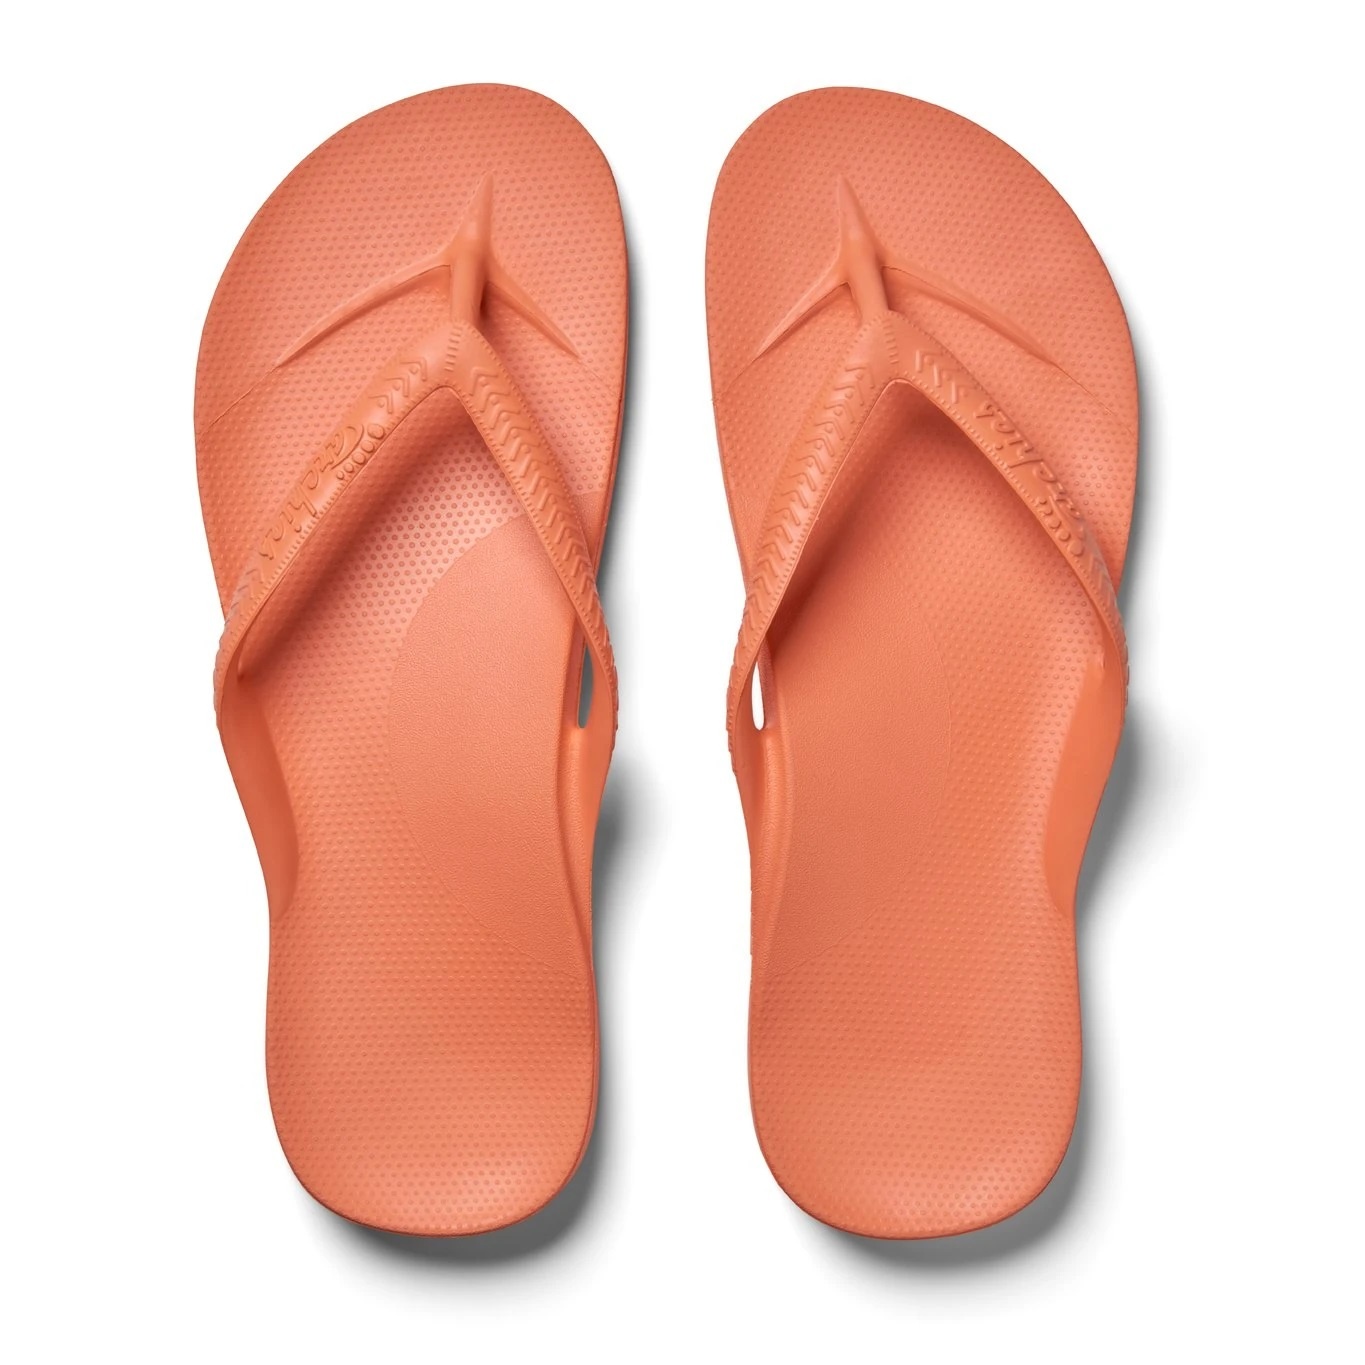 Archies Arch Support Flip Flop